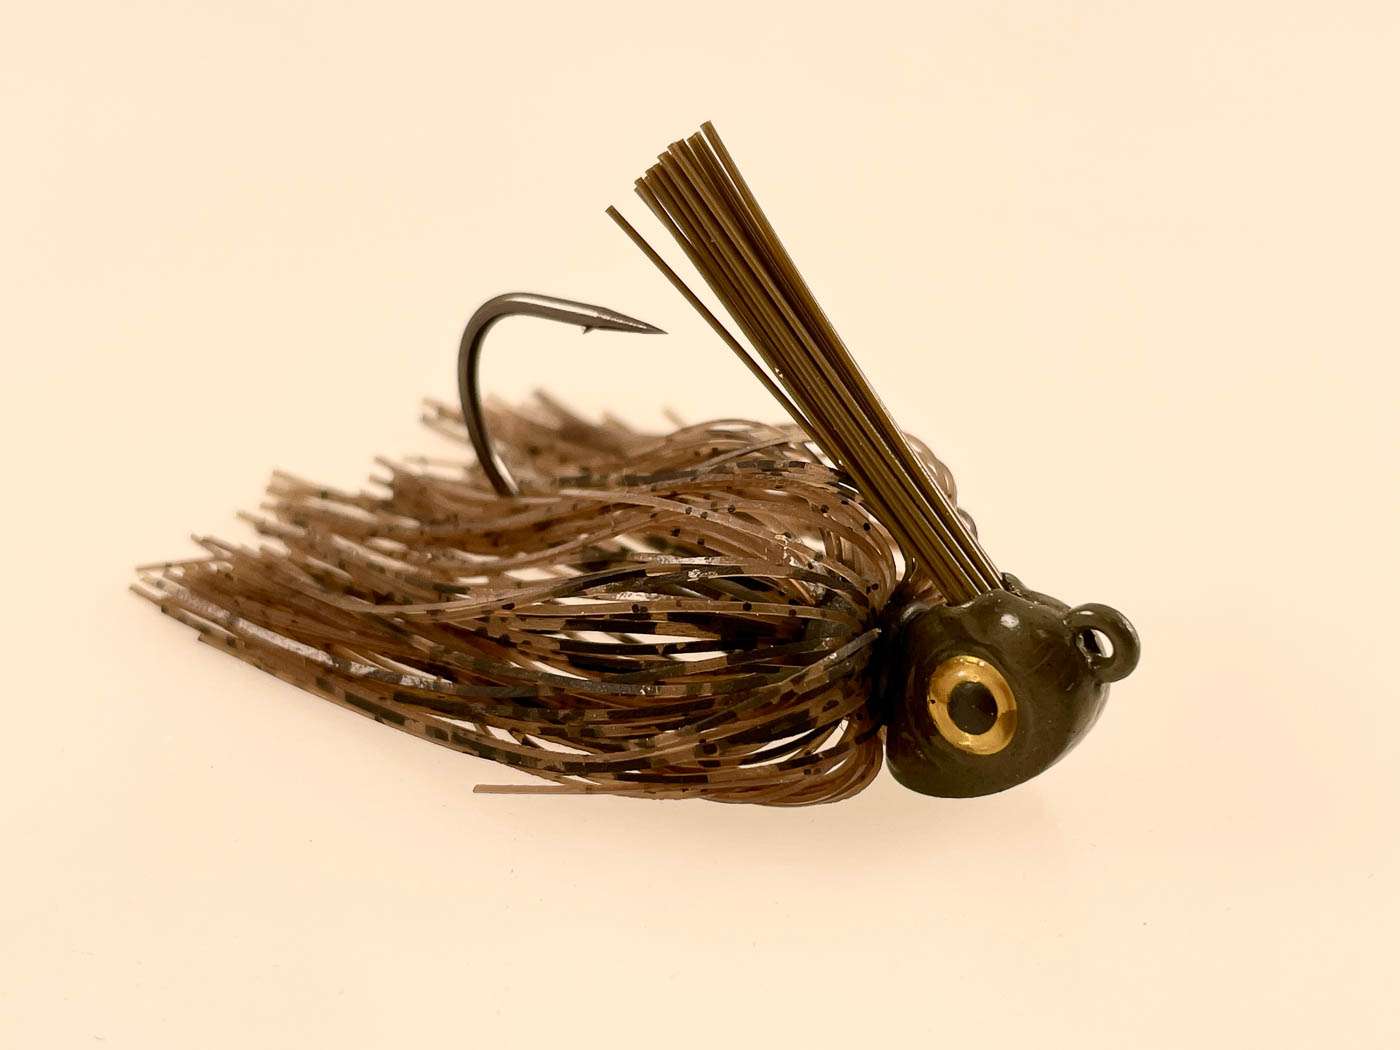 <p><strong>Missile Baits Ikeâs Mini Swim Jig </strong></p><p>The popular Mini Flip Jig now has a swimming sibling called Ikeâs Mini Swim Jig. Structured on a VMC 30-degree, vertical line tie, 3/0 hook, the Mini Swim Jig features a compact design and the same fine cut skirt of the Mini Flip Jig, but its big 3D eyes really stand out on the keeled head. A new super spike keeper keeps soft plastics on the hook. Available in 3/16-, 5/16-, and 7/16-ounce sizes and 10 colors. $5.49. <a href=